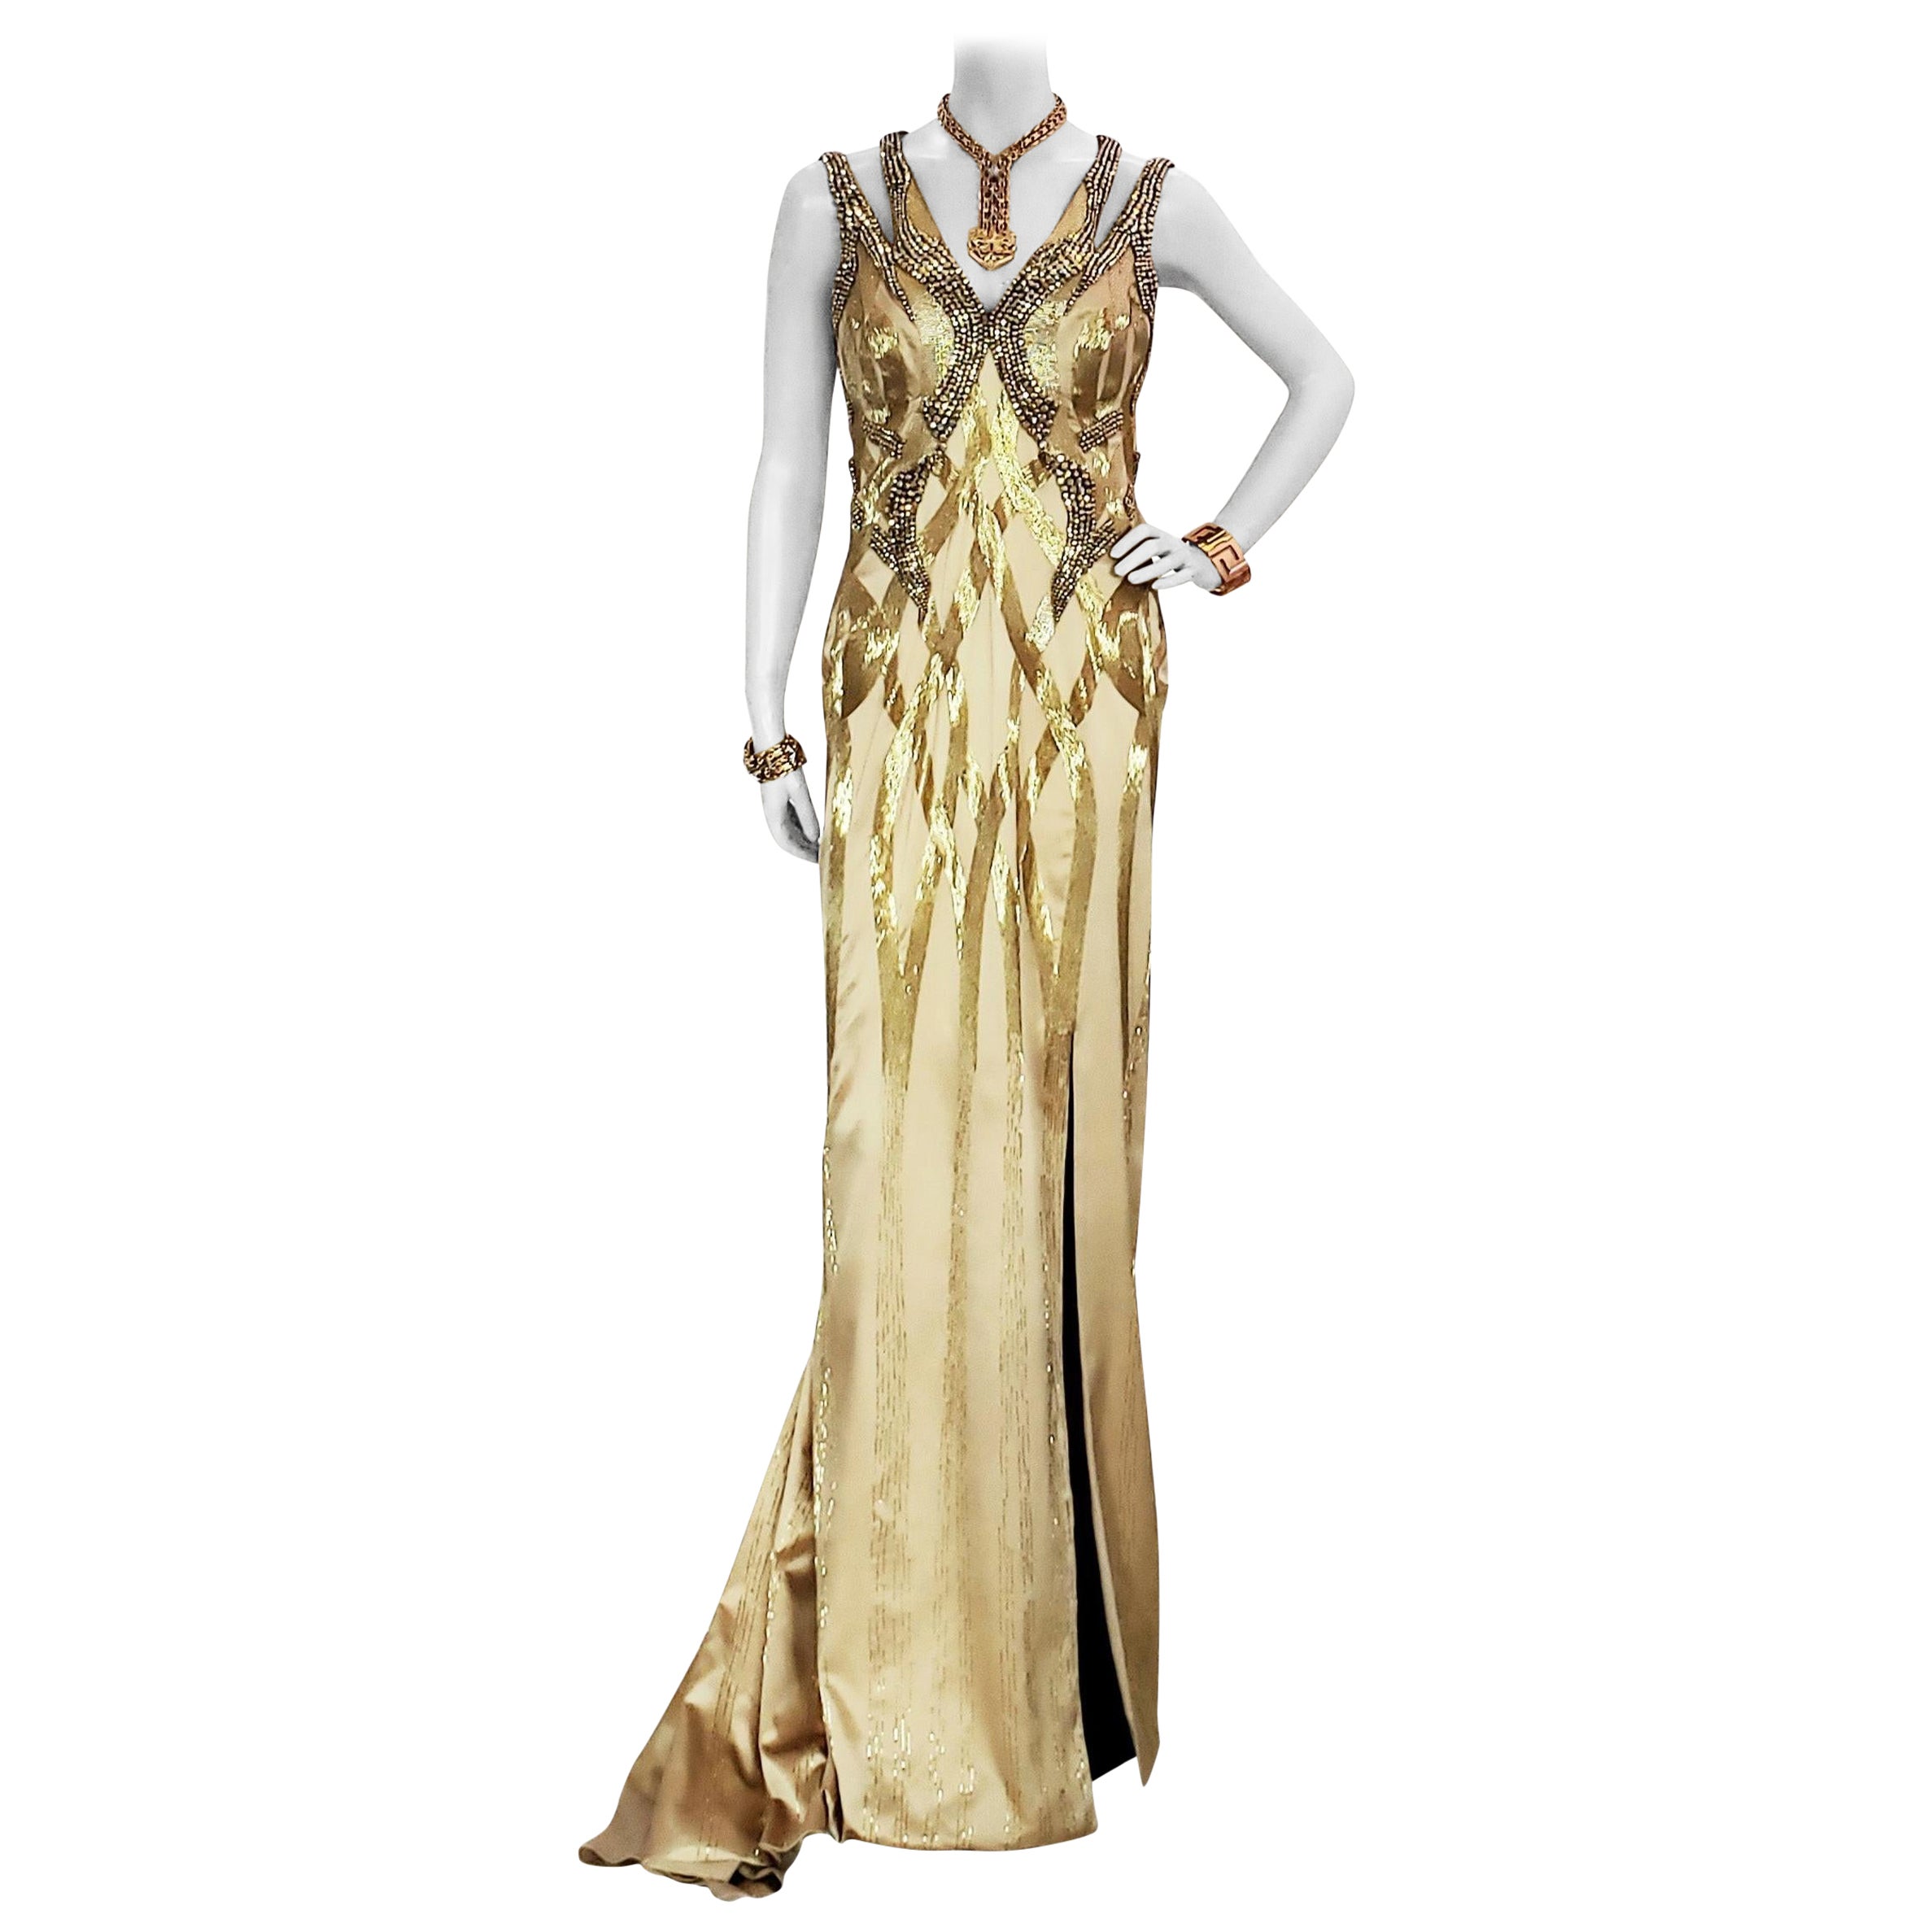 VERSACE GOLDEN EMBELLISHED w/ SWAROWSKI STONES GOWN  DRESS as seen on Irina  For Sale